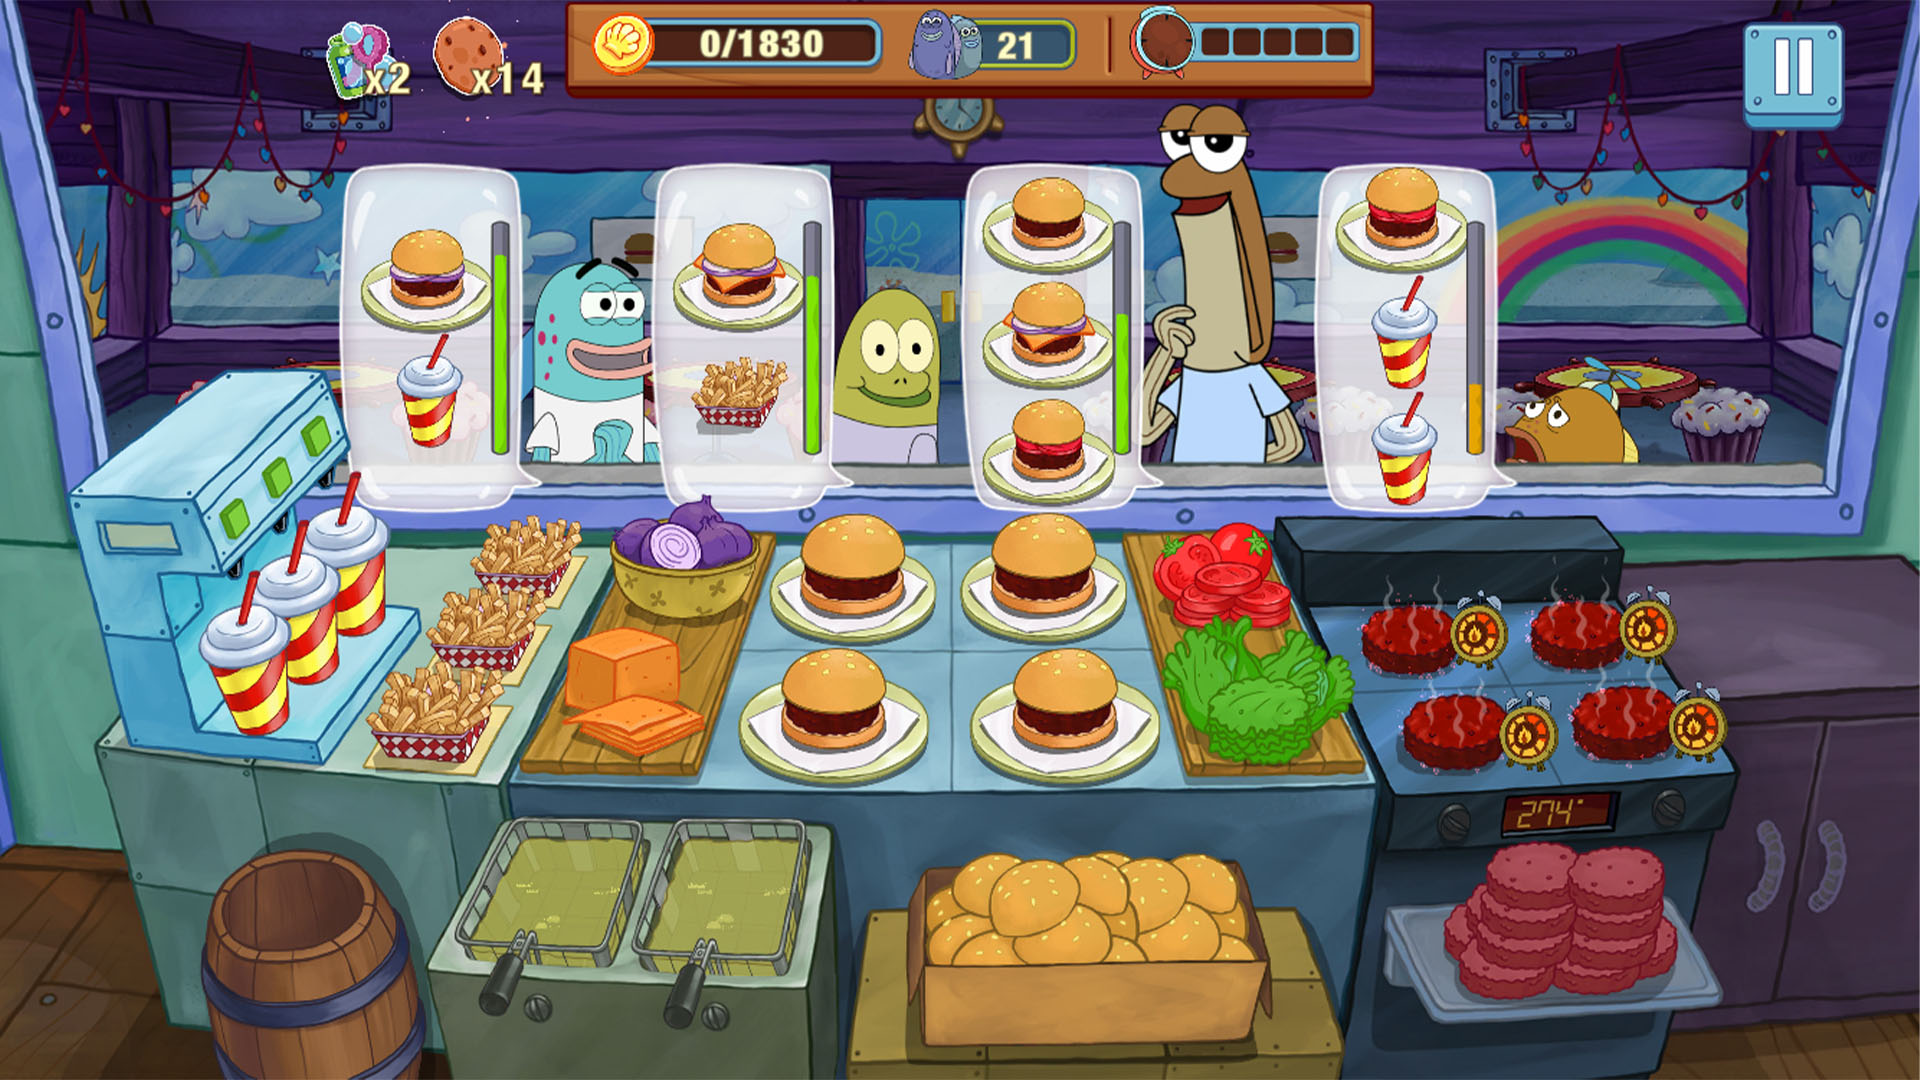 Three Fun Mobile Games All About Cooking and Restaurants - Eater